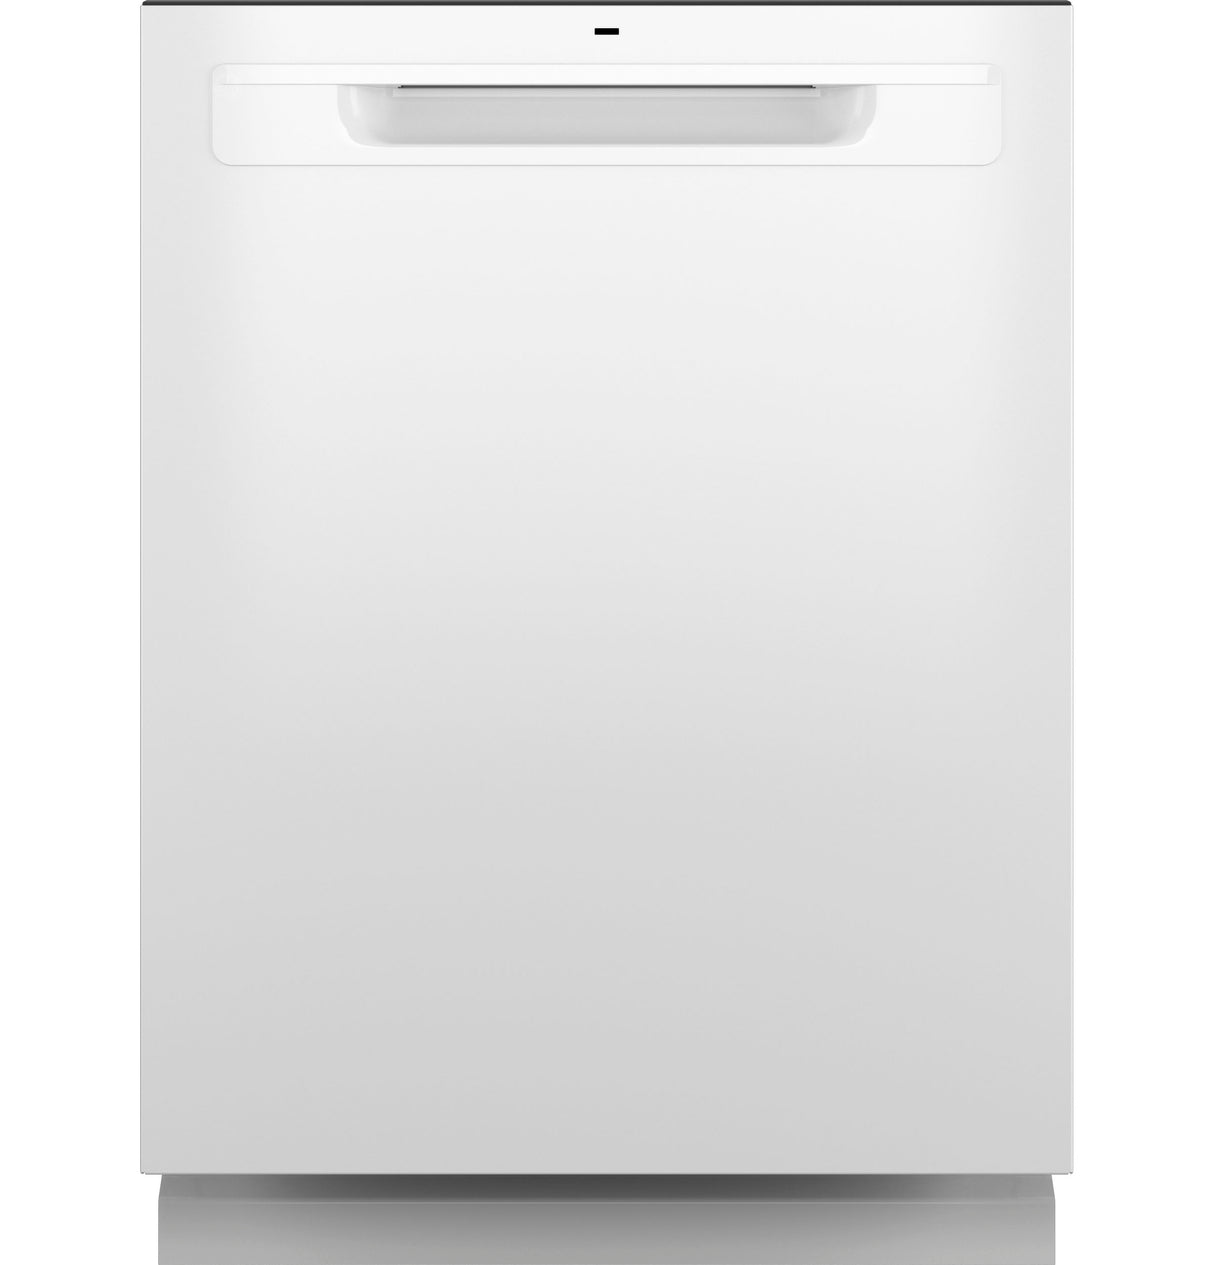 GE(R) ENERGY STAR(R) Top Control with Stainless Steel Interior Dishwasher with Sanitize Cycle - (GDP670SGVWW)